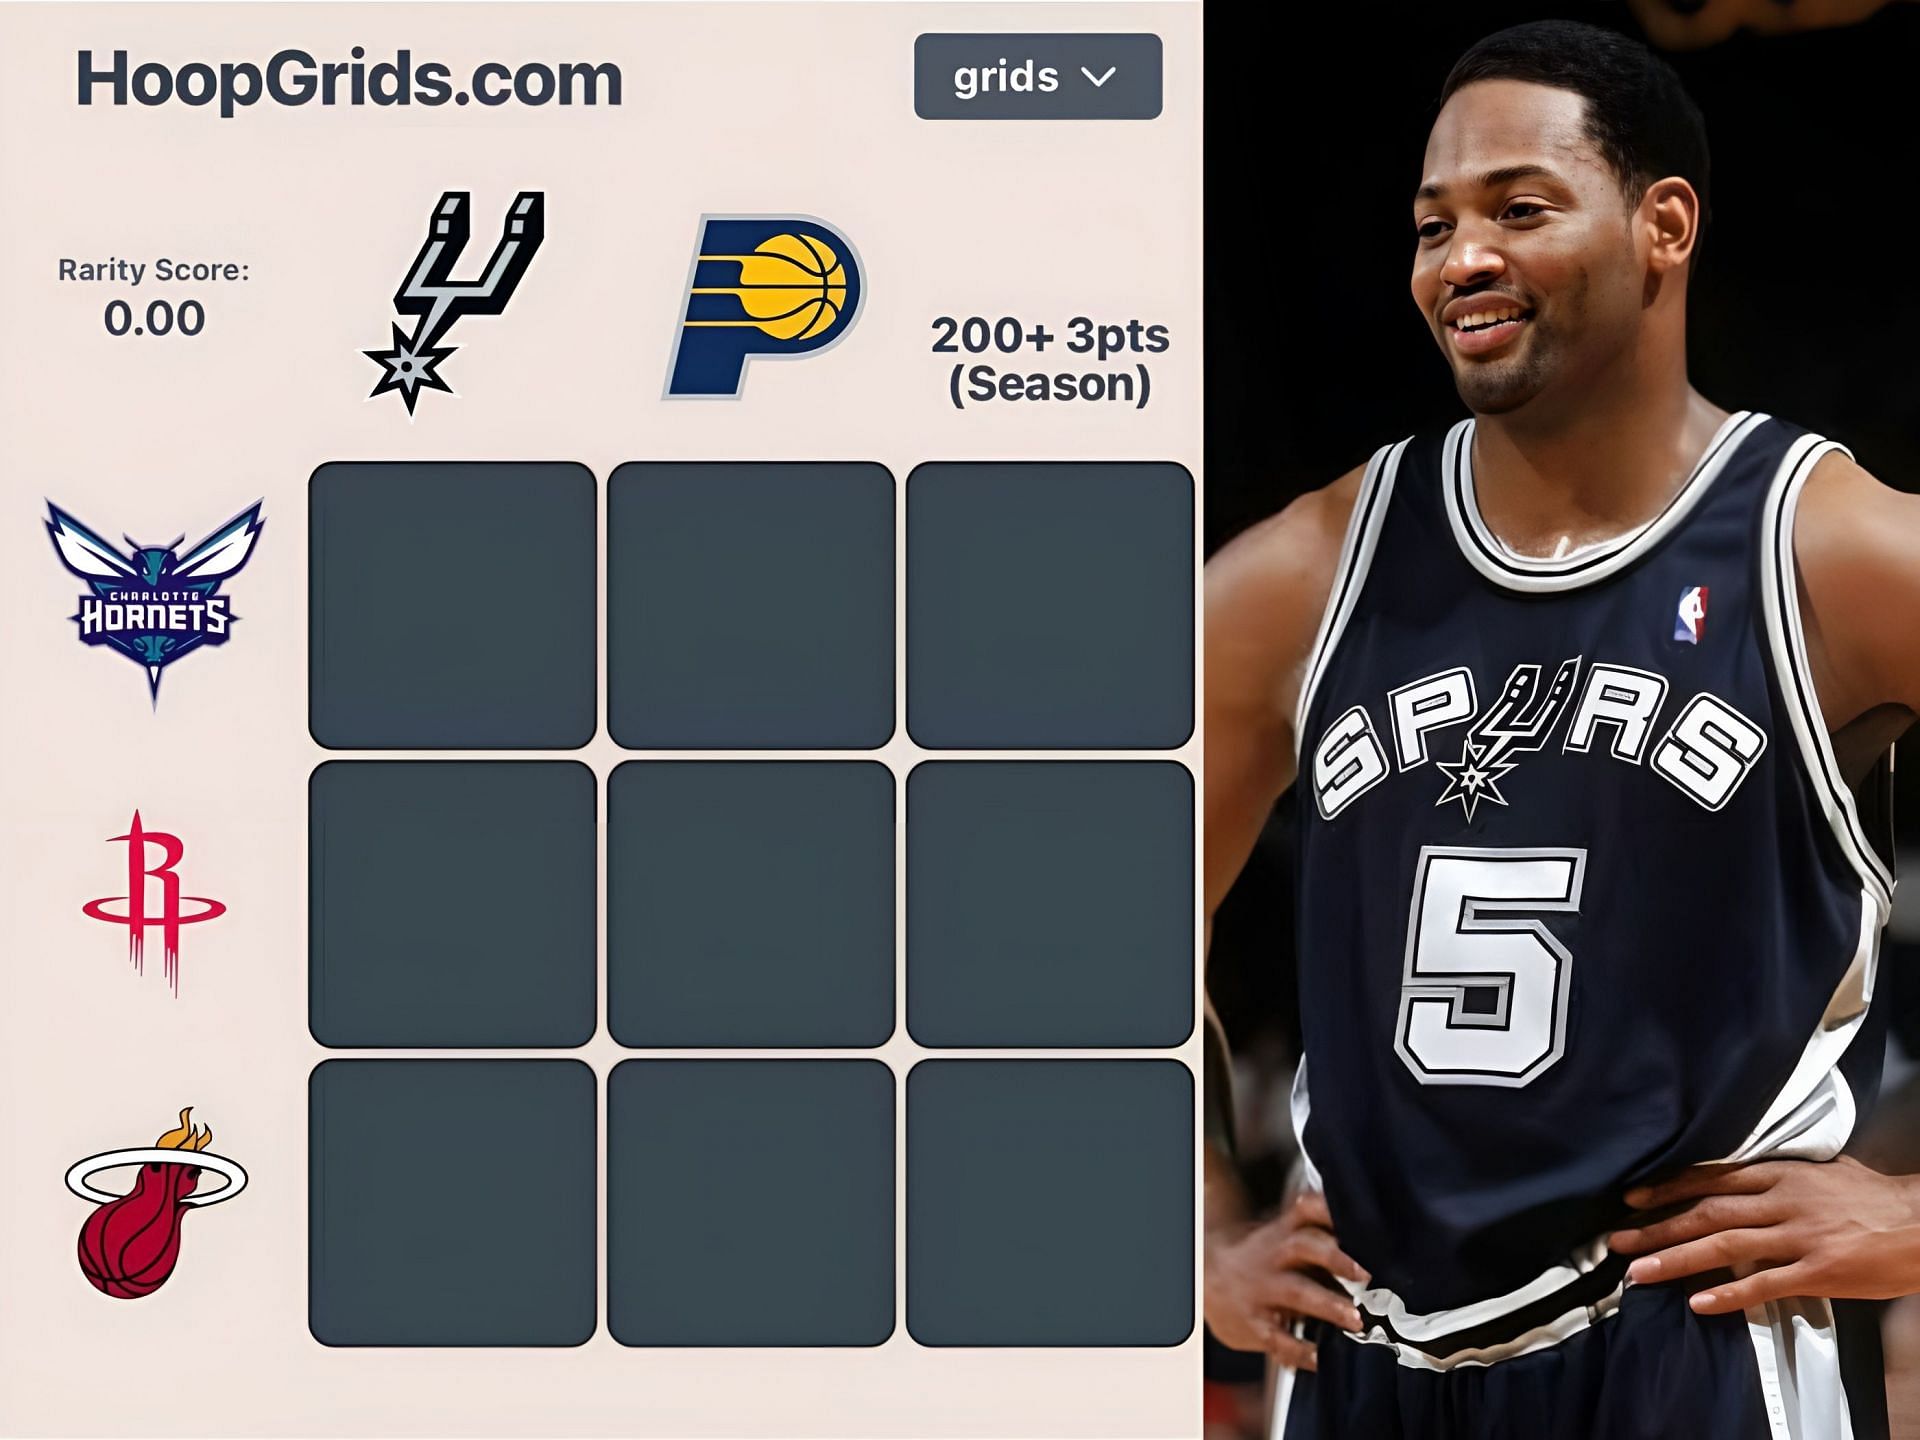 Which Spurs players have played for the Rockets and Heat? NBA Hoop Grids answers for July 24